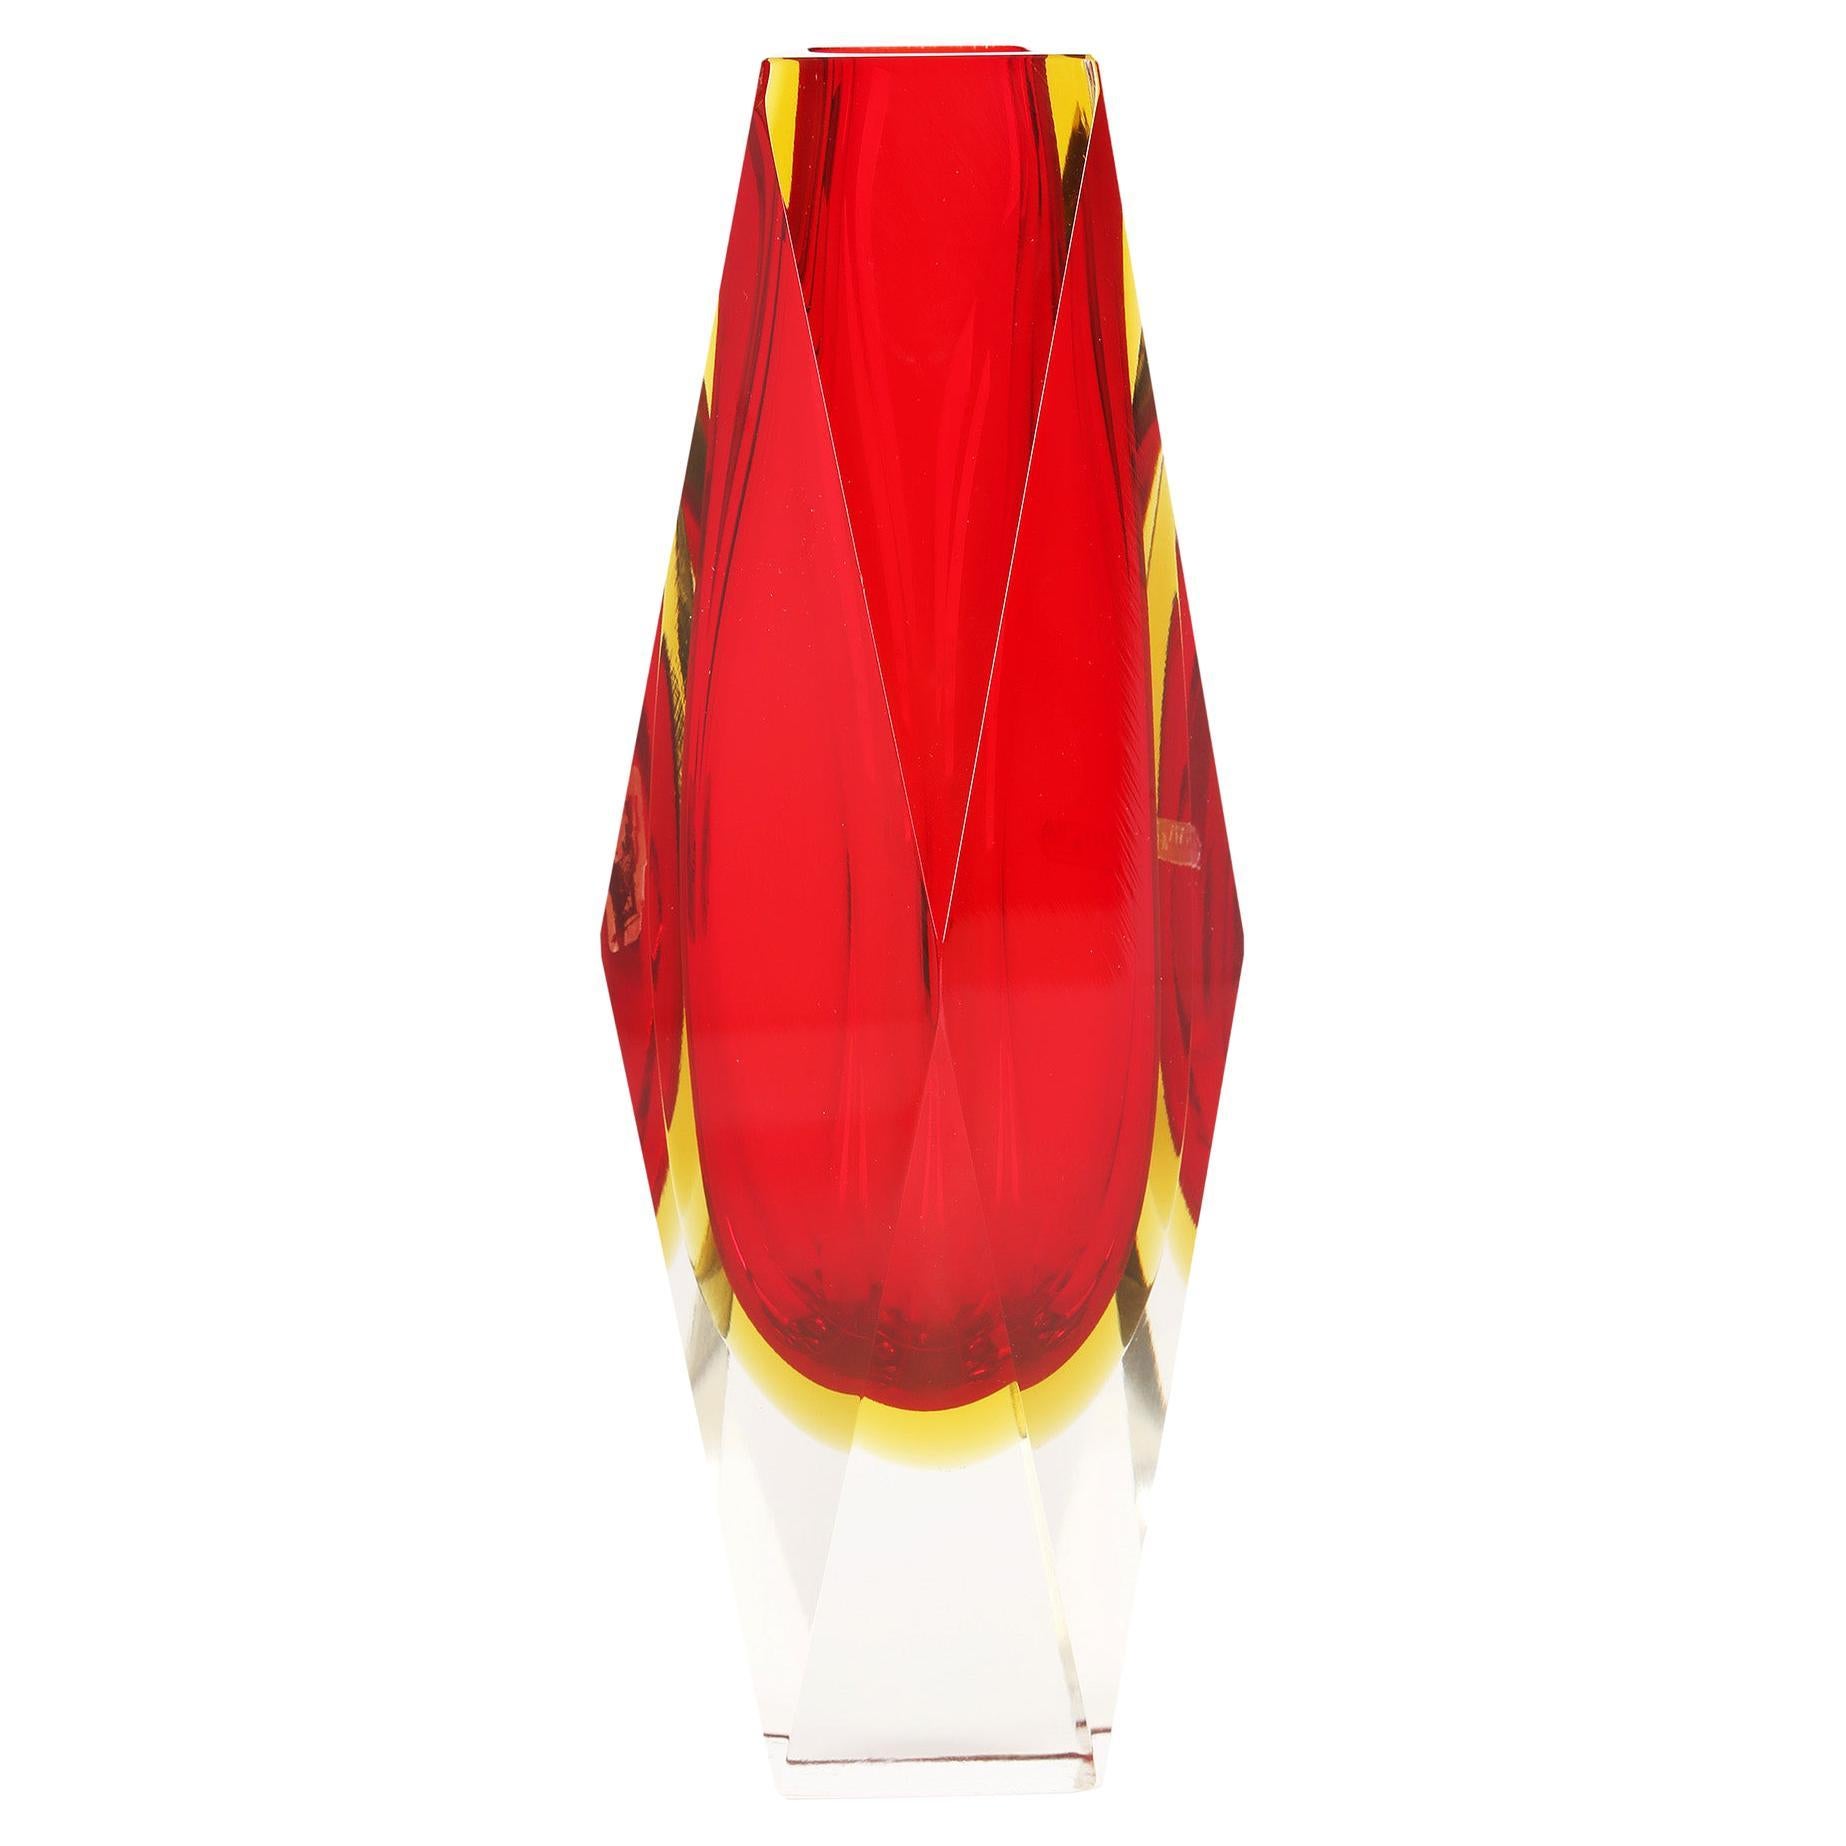 Pagnin & Bon Italian Murano Red and Yellow Sommerso Facet Cut Glass Vase For Sale